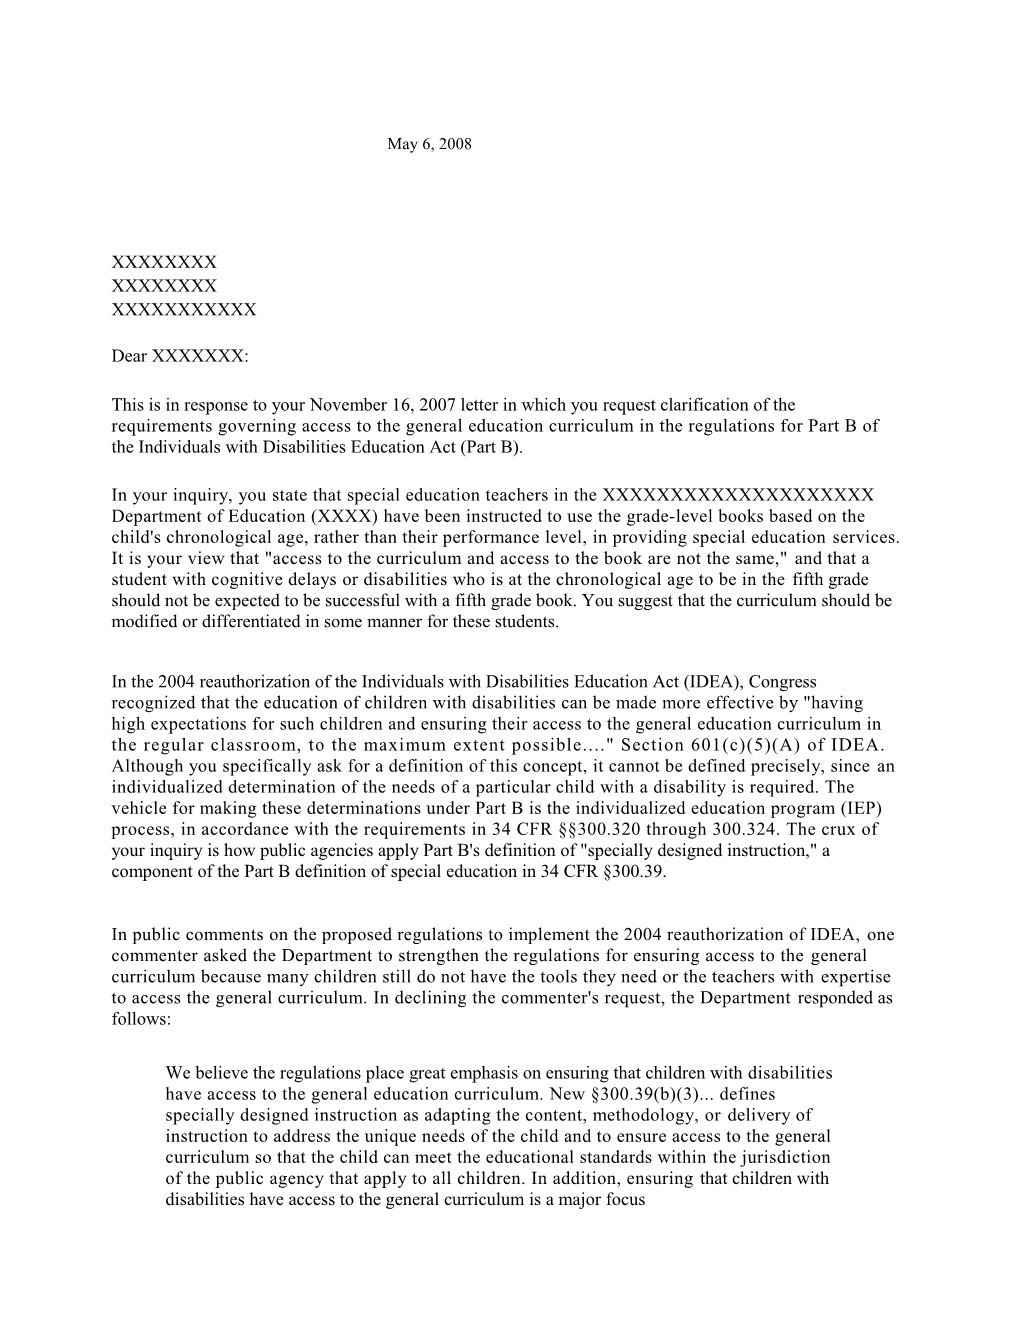 Redacted Letter Dated 05/06/08 Re: Special Education (MS Word)